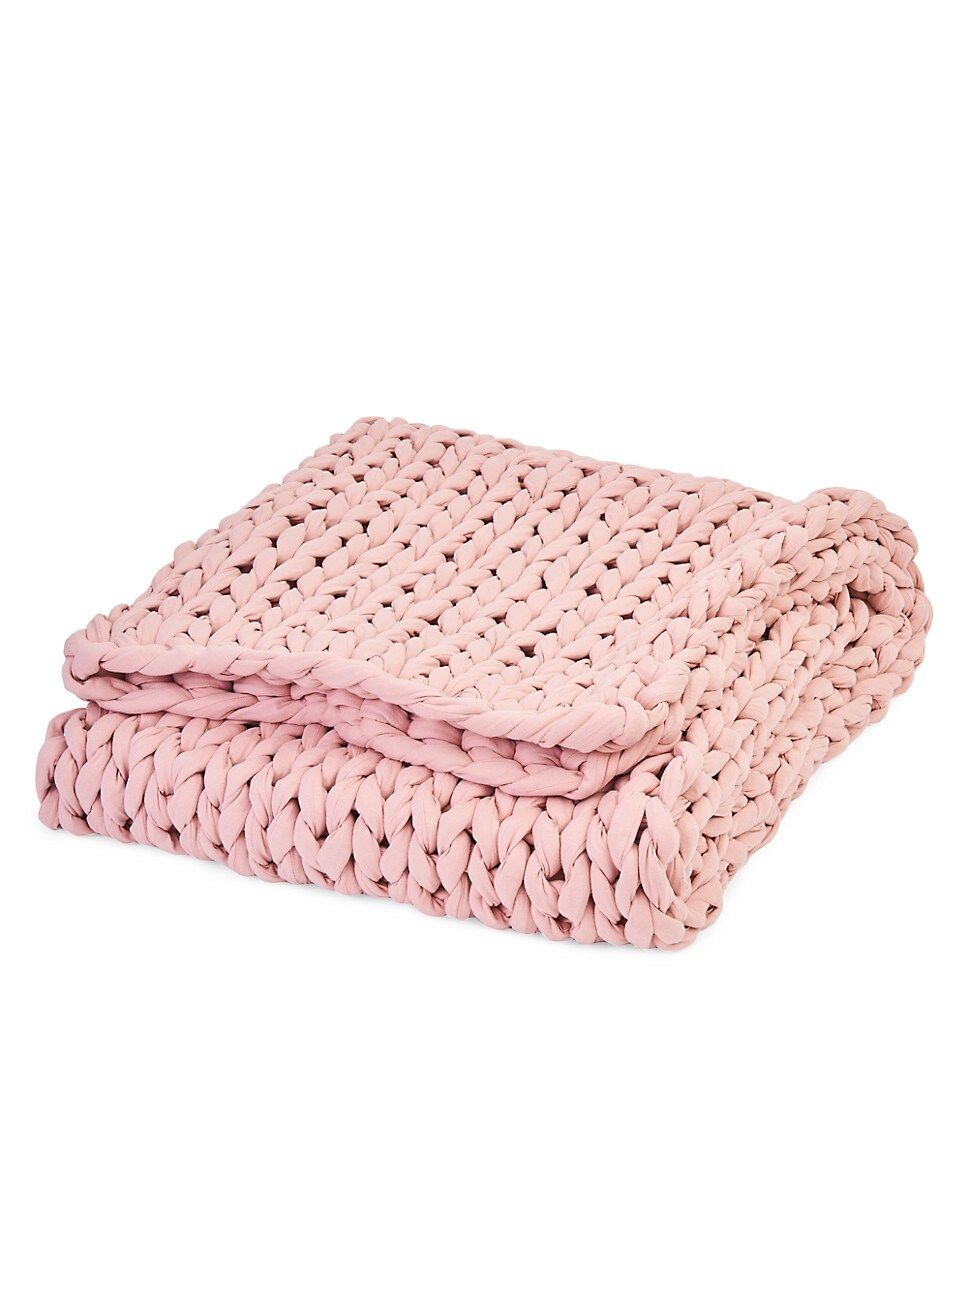 Cotton Napper Weighted Knit Blanket | Saks Fifth Avenue